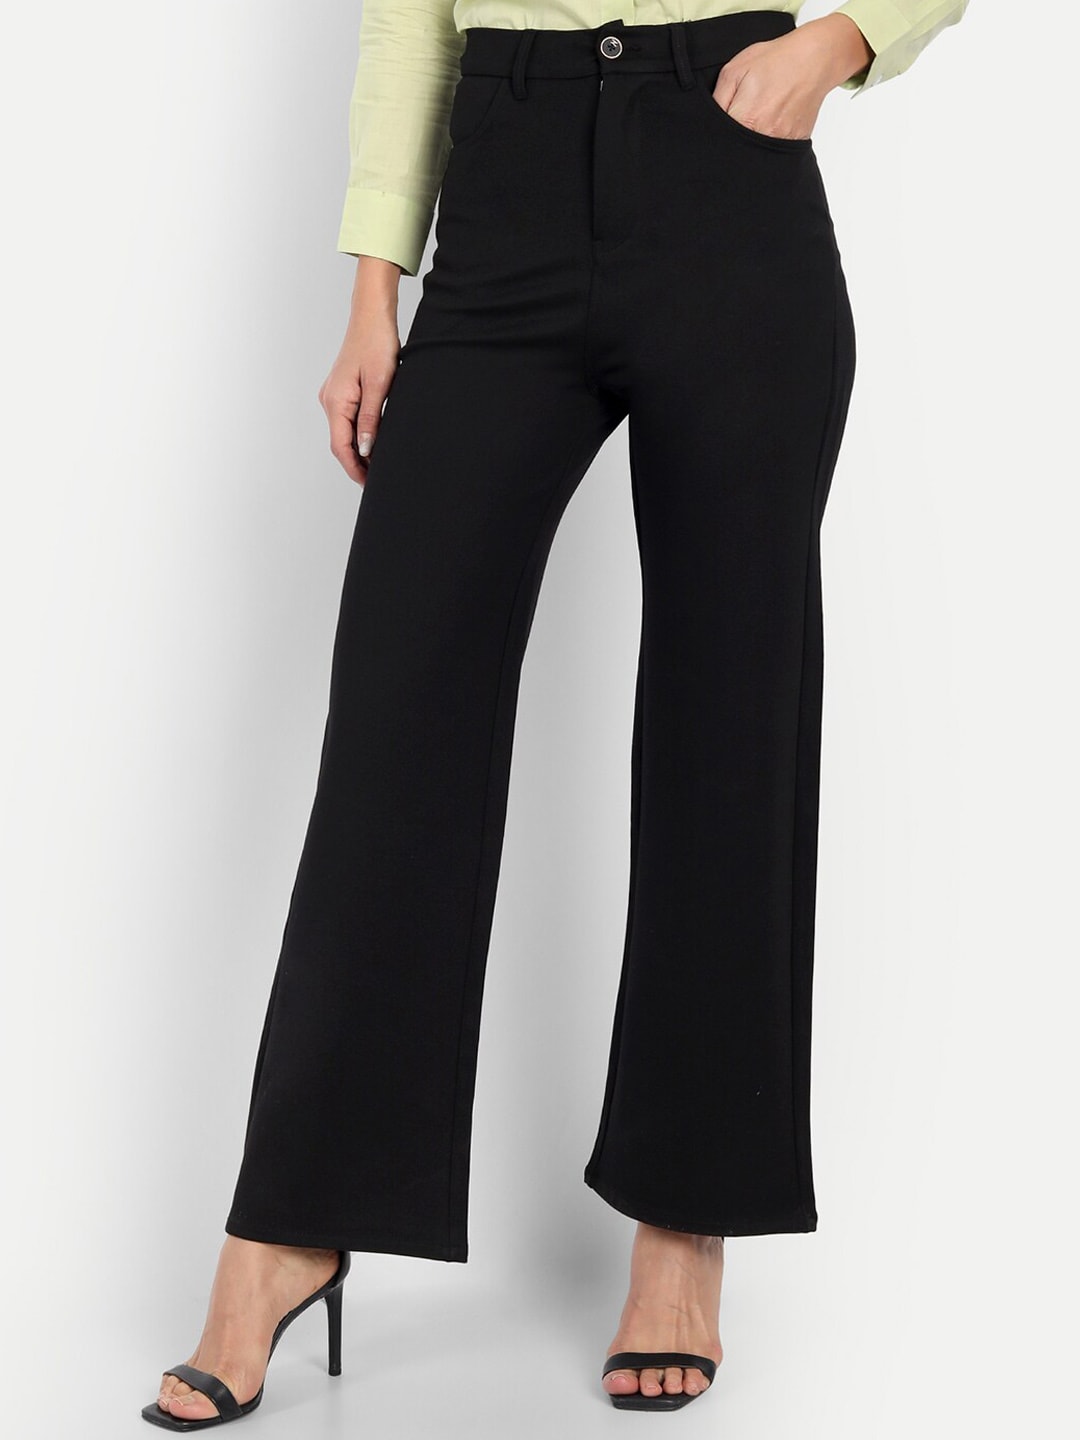 Next One Women Black Straight Fit High-Rise Trousers Price in India